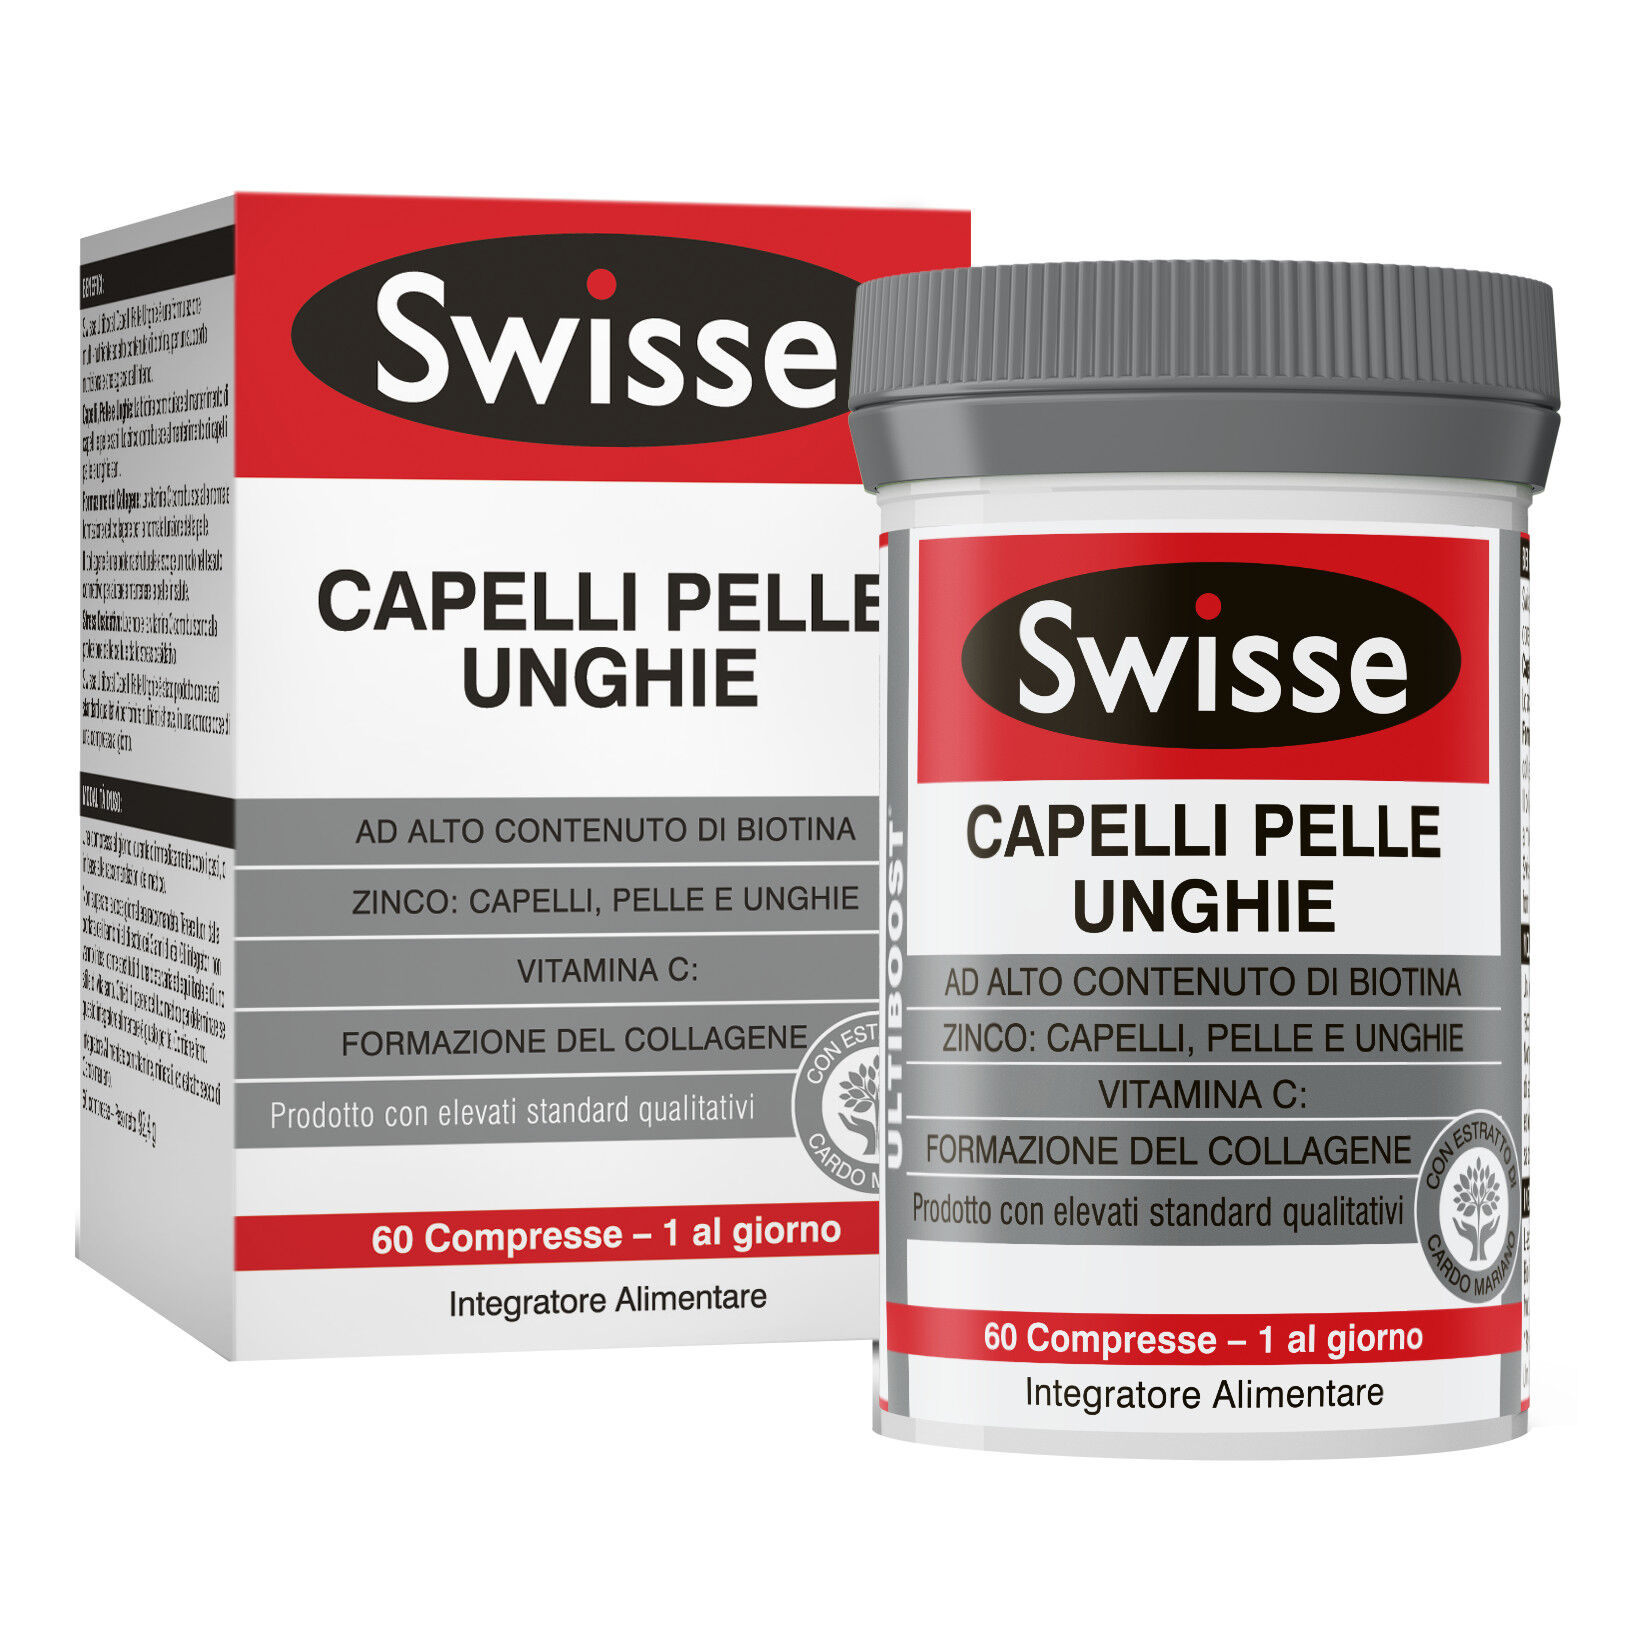 Health And Happiness (H&h) It. Swisse Capelli Pelle Unghie 60 Compresse